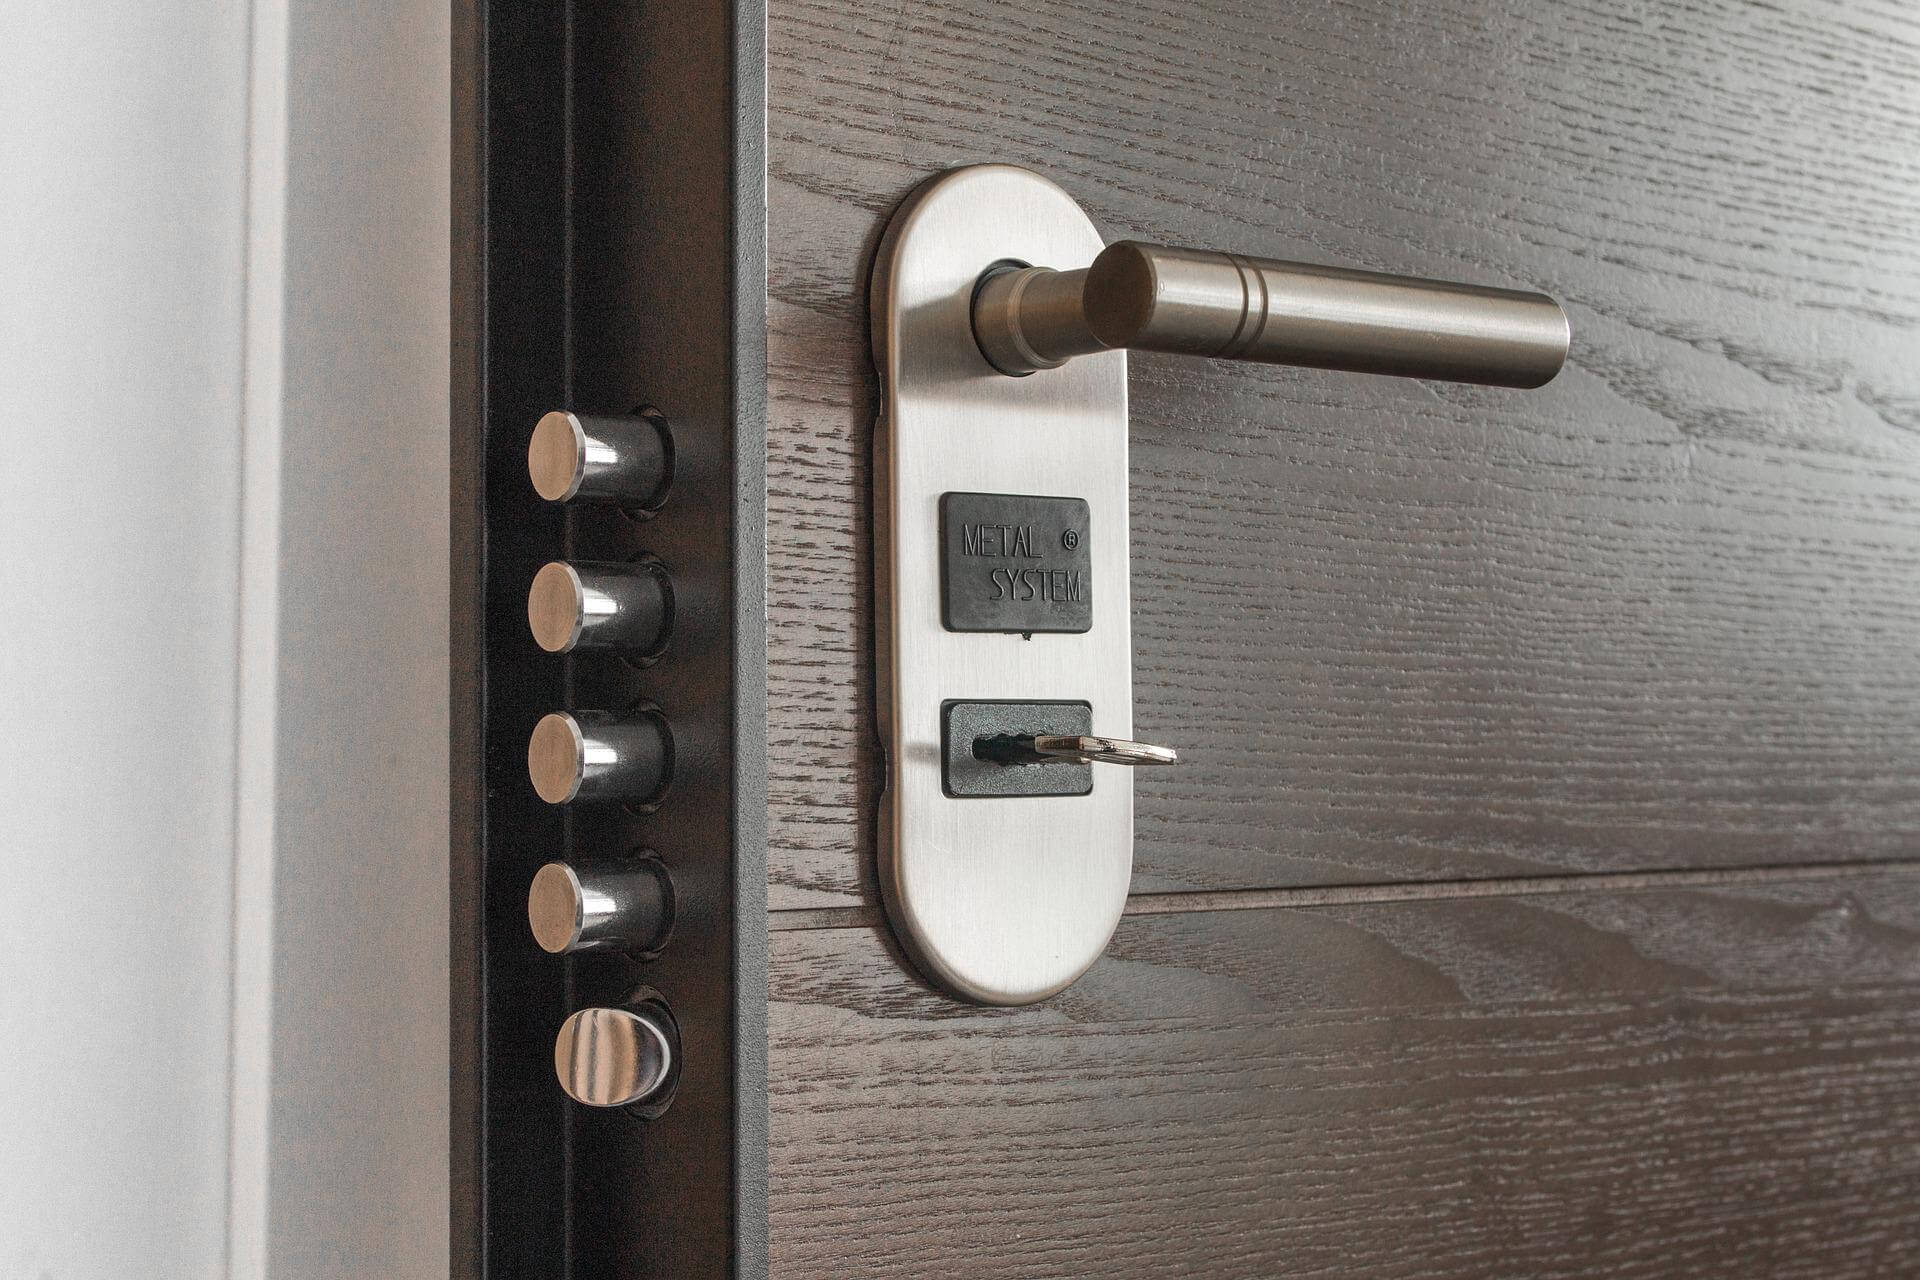 A hotel door with large locking mechanisms